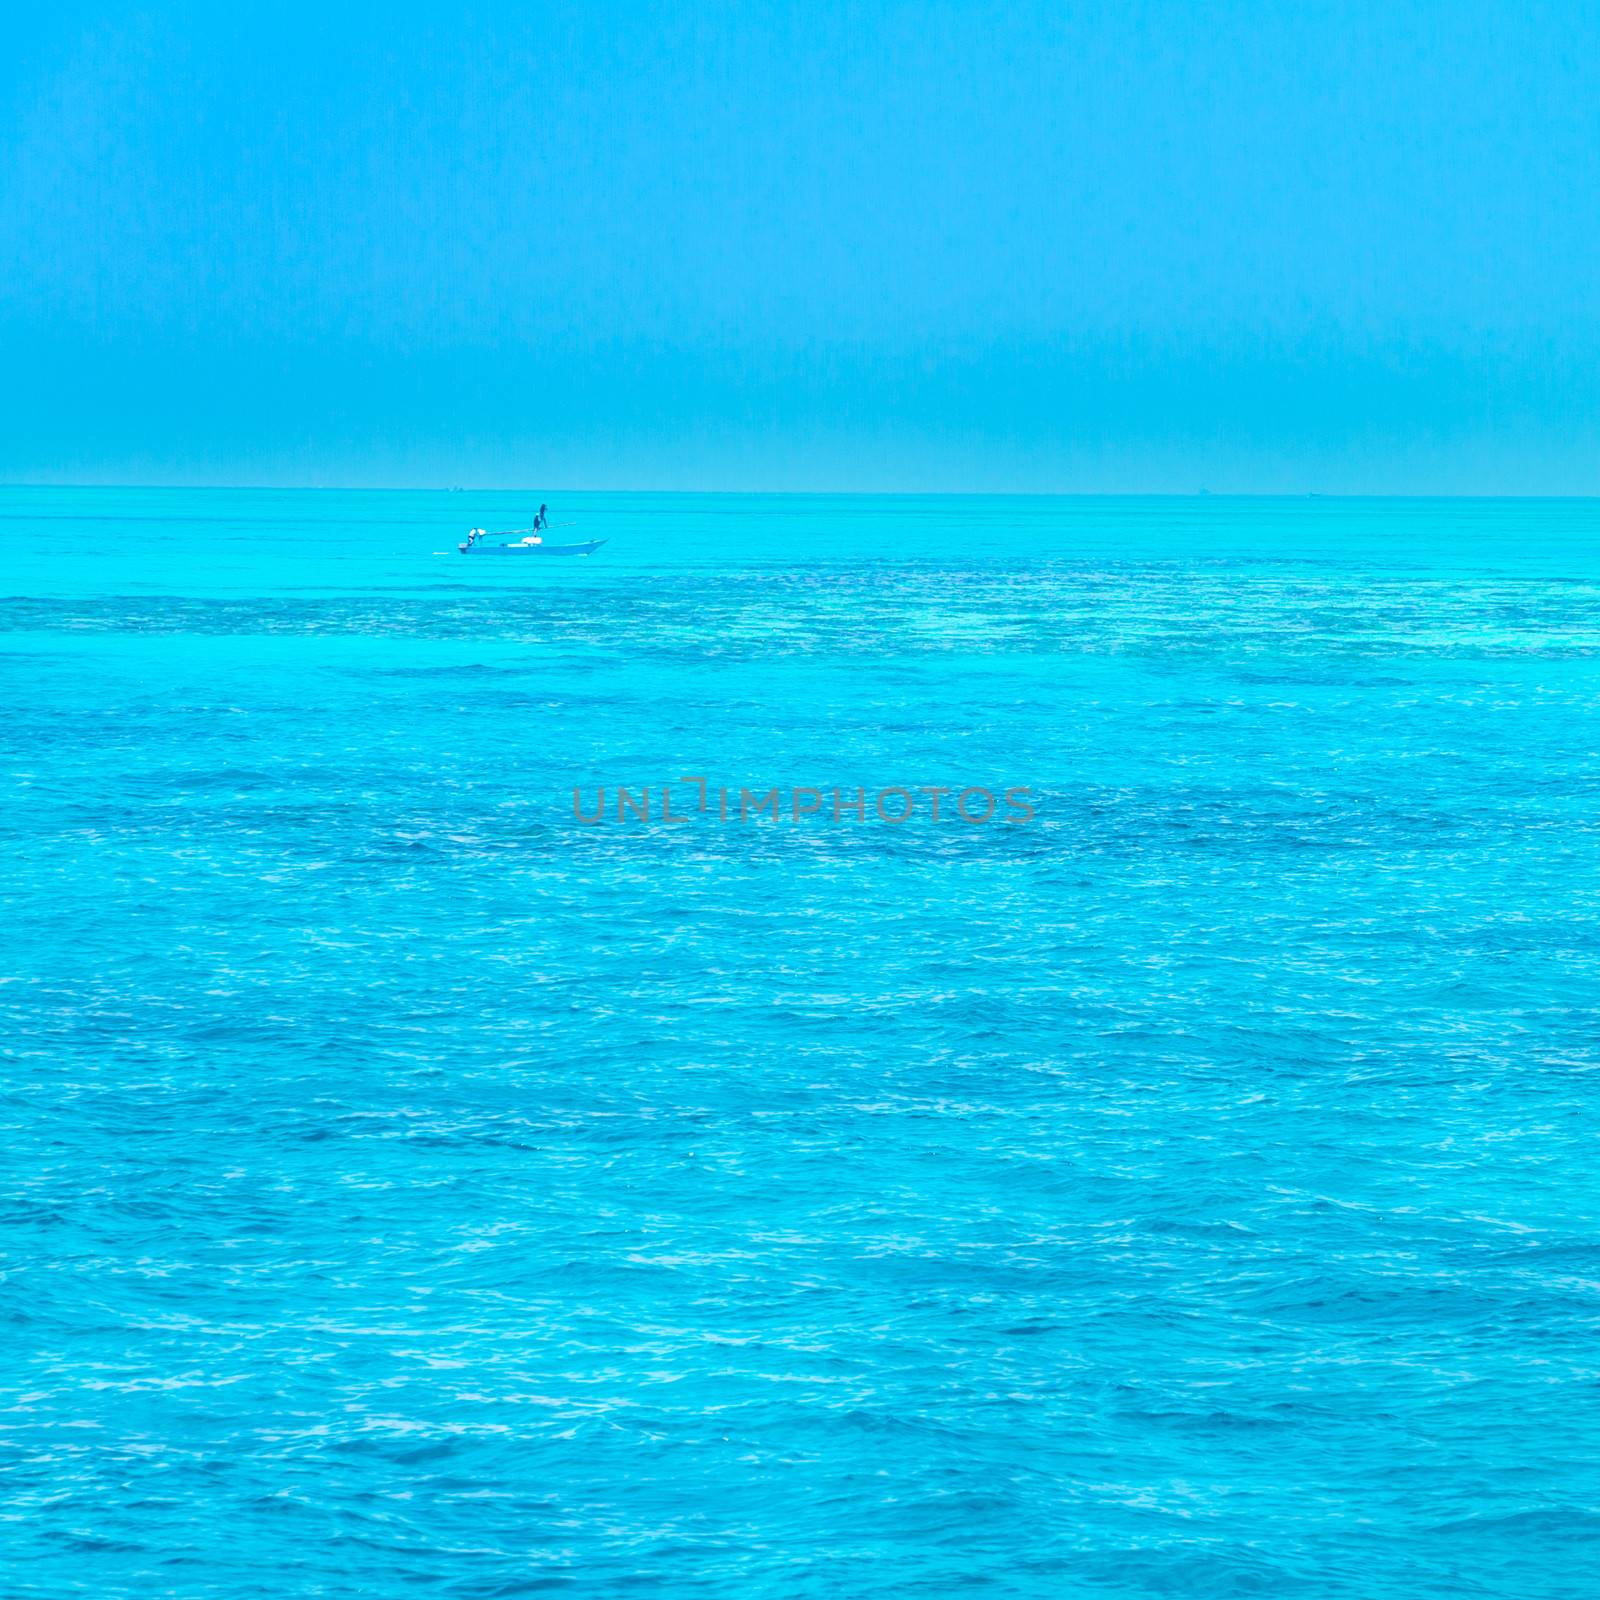 Turquoise coral reef in red sea. Fisherman's boat in the background.